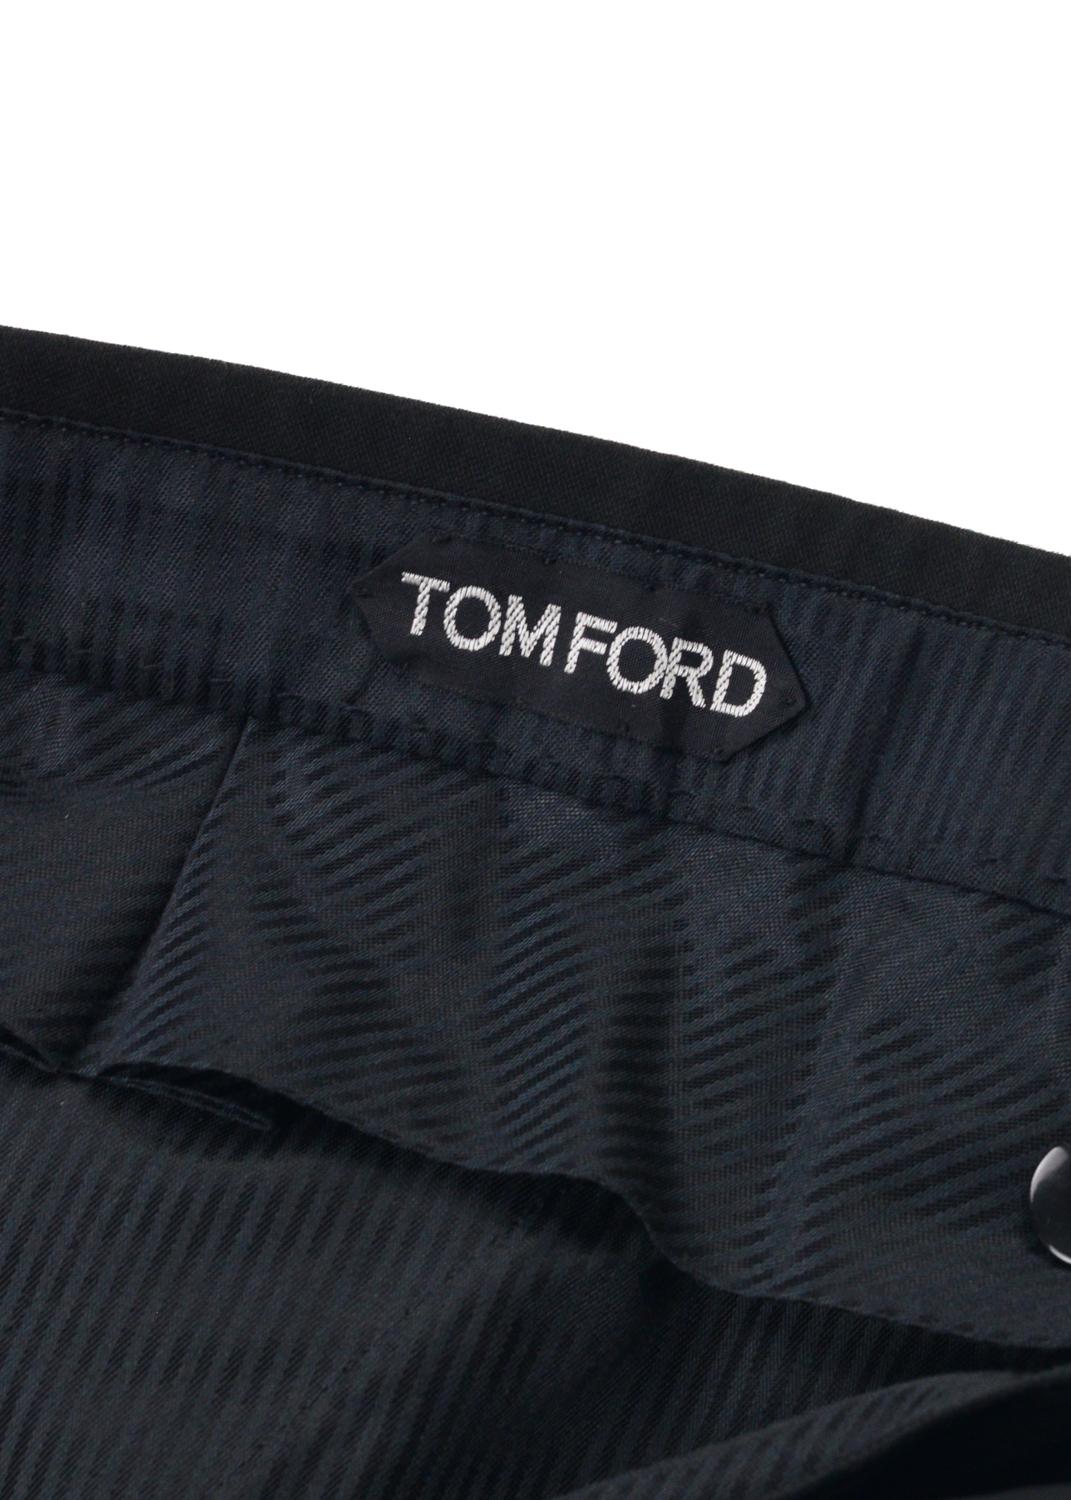 Tom Ford Men's Black Cotton Pleated Front Trousers For Sale 2